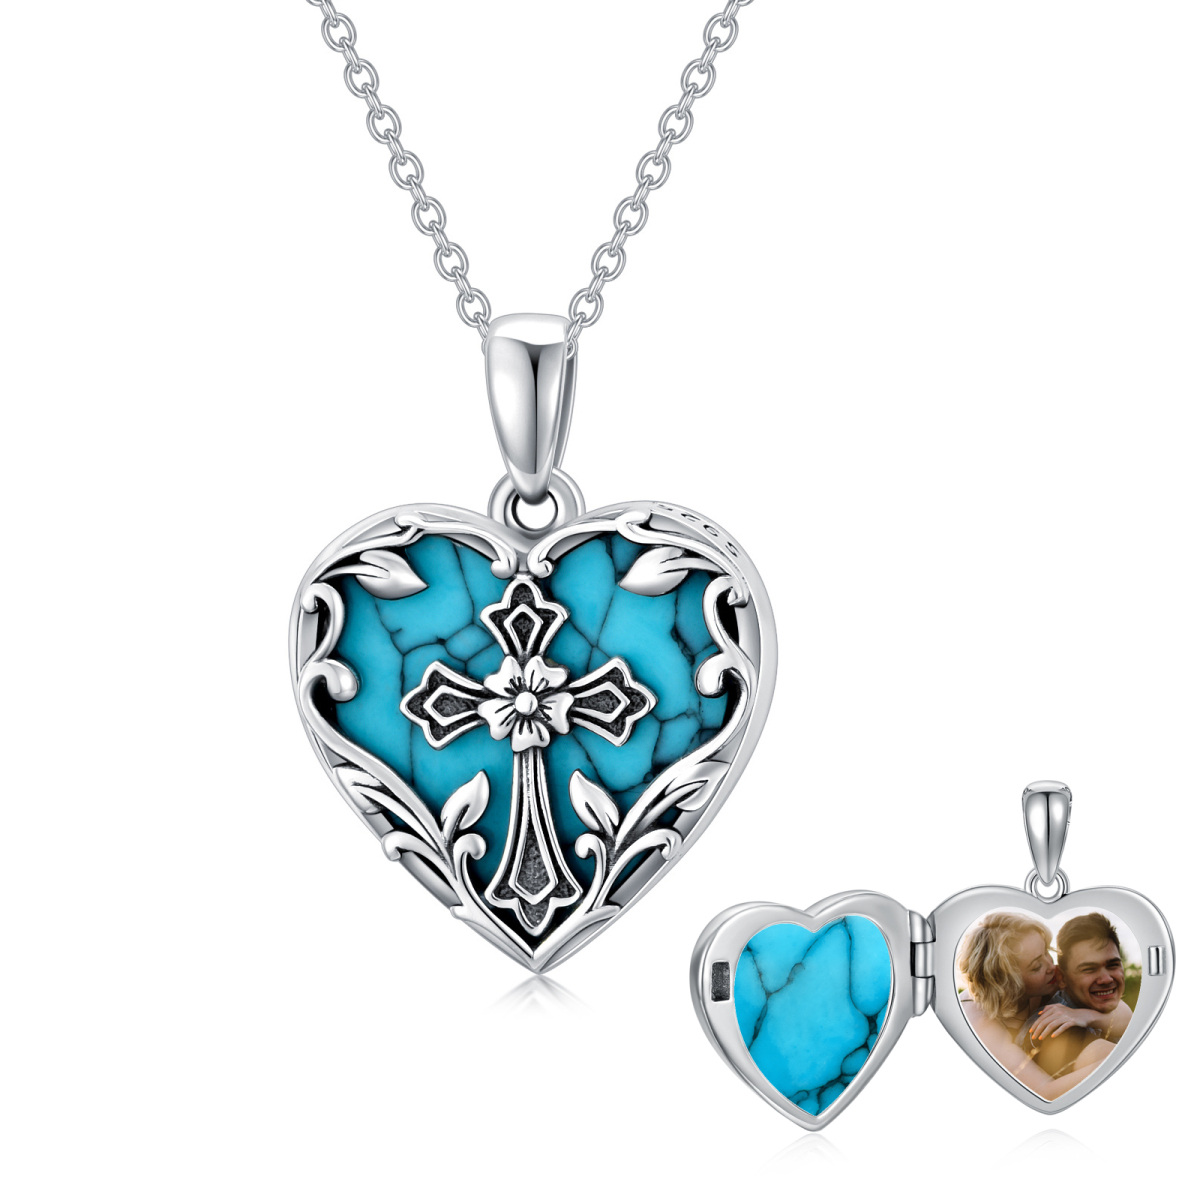 Sterling Silver Heart Turquoise Heart Personalized Photo Locket Necklace with Engraved Word-1